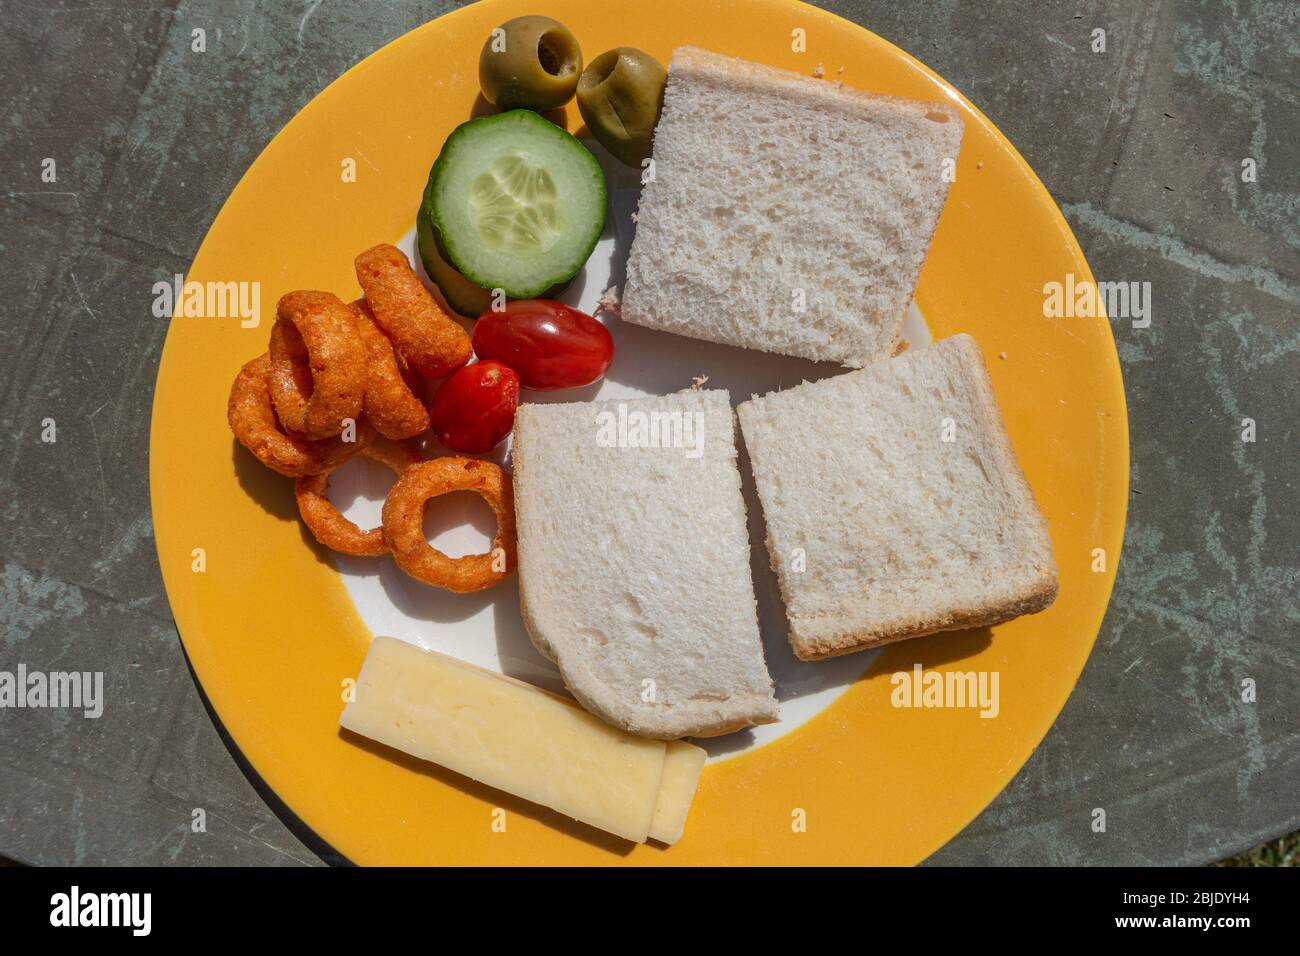 A plate of food comprising of sandwiches and salad vegetables on an old garden table. Stock Photo